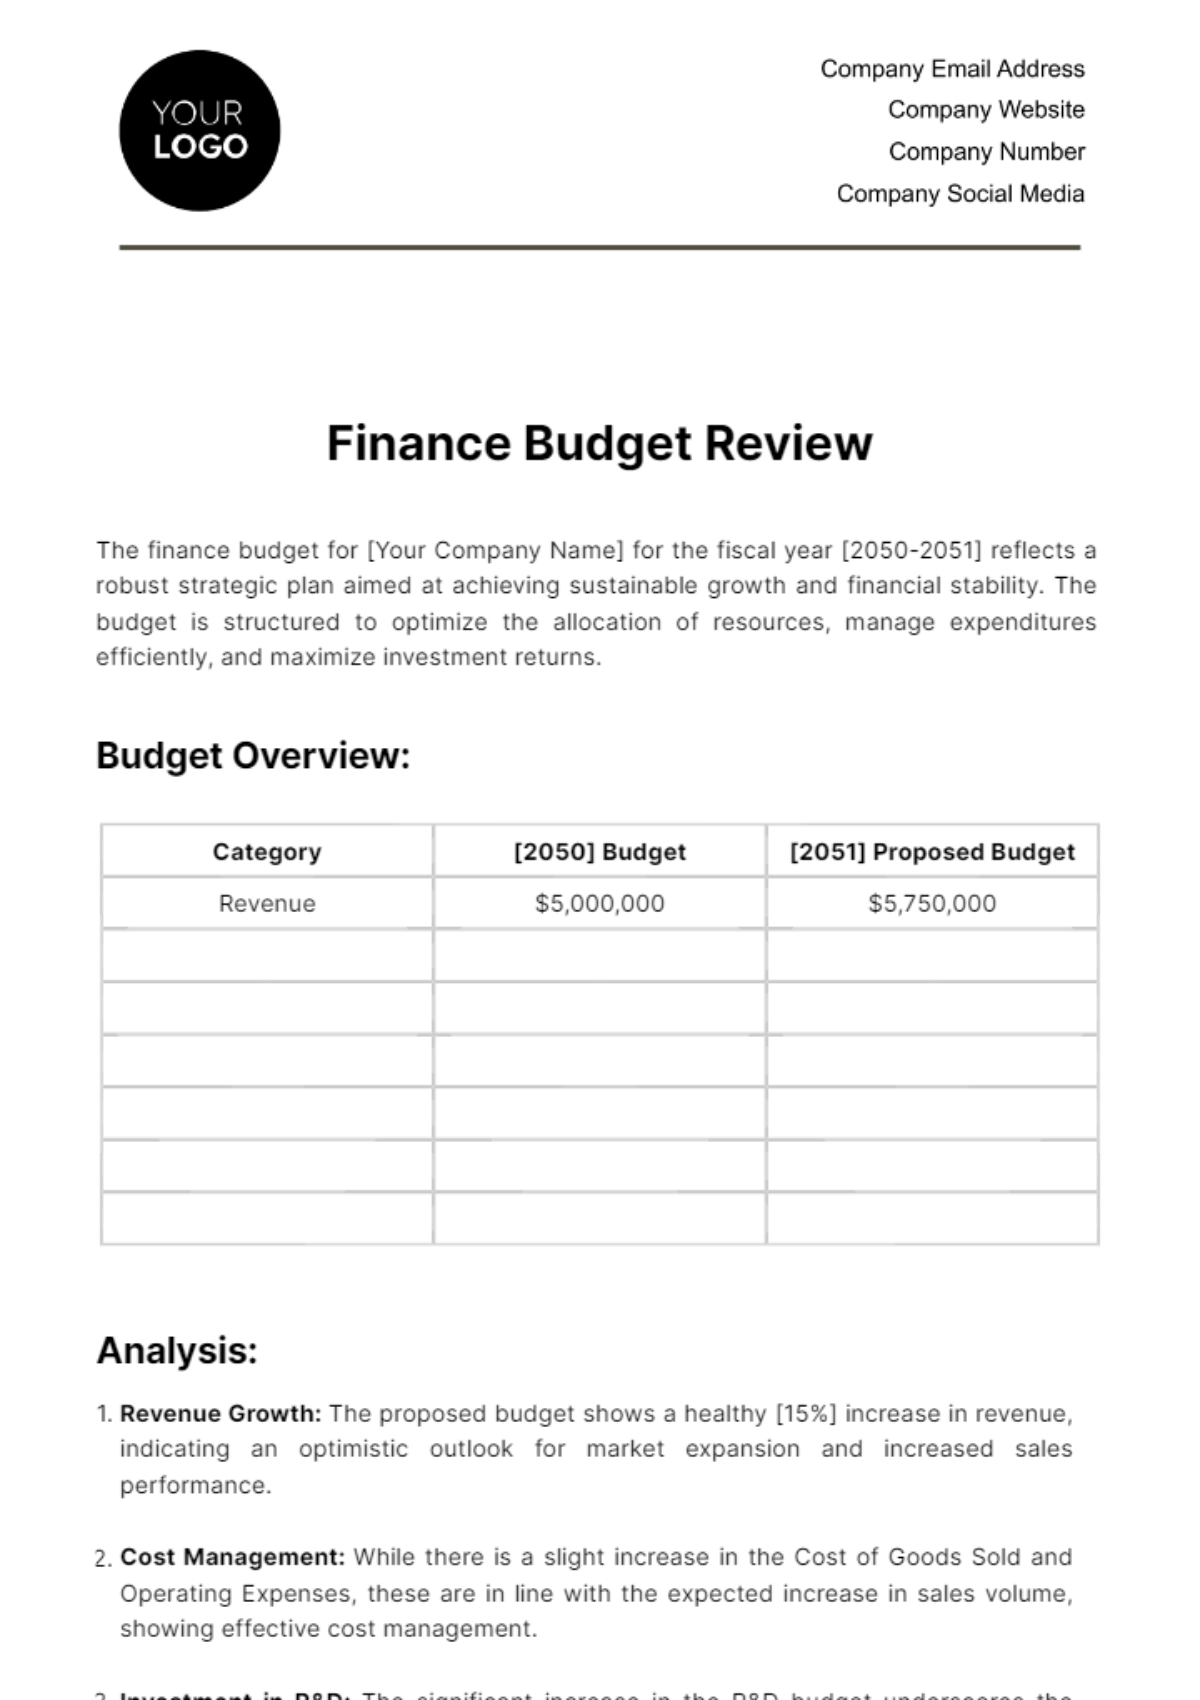 Finance Budget Review Template